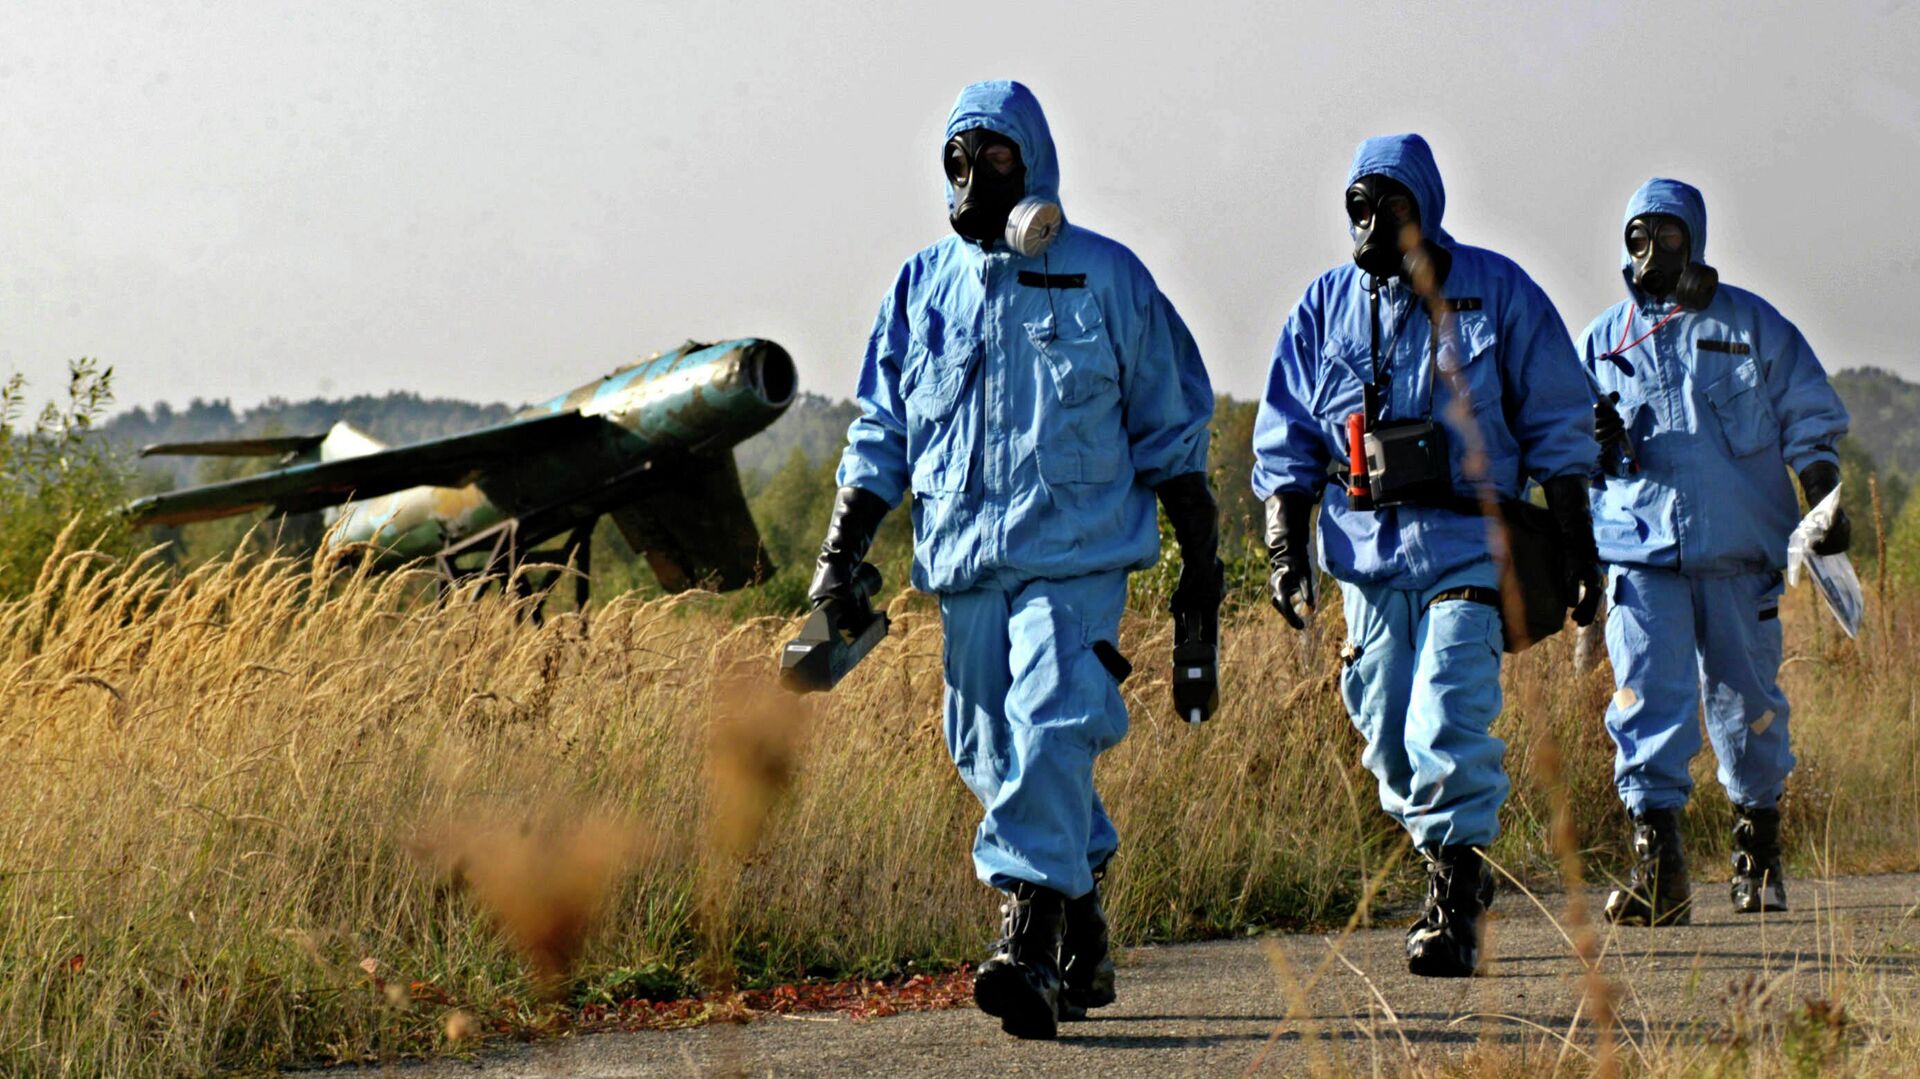 Chemical warfare experts from a multinational team examine the area for traces of contamination with a toxic agent during the NATO-led Joint Assistance exercise in the Yavoriv military training facility, 50 kilometers (31 miles) west of Lviv, Ukraine, Wednesday, Oct. 12, 2005 - Sputnik International, 1920, 28.02.2023